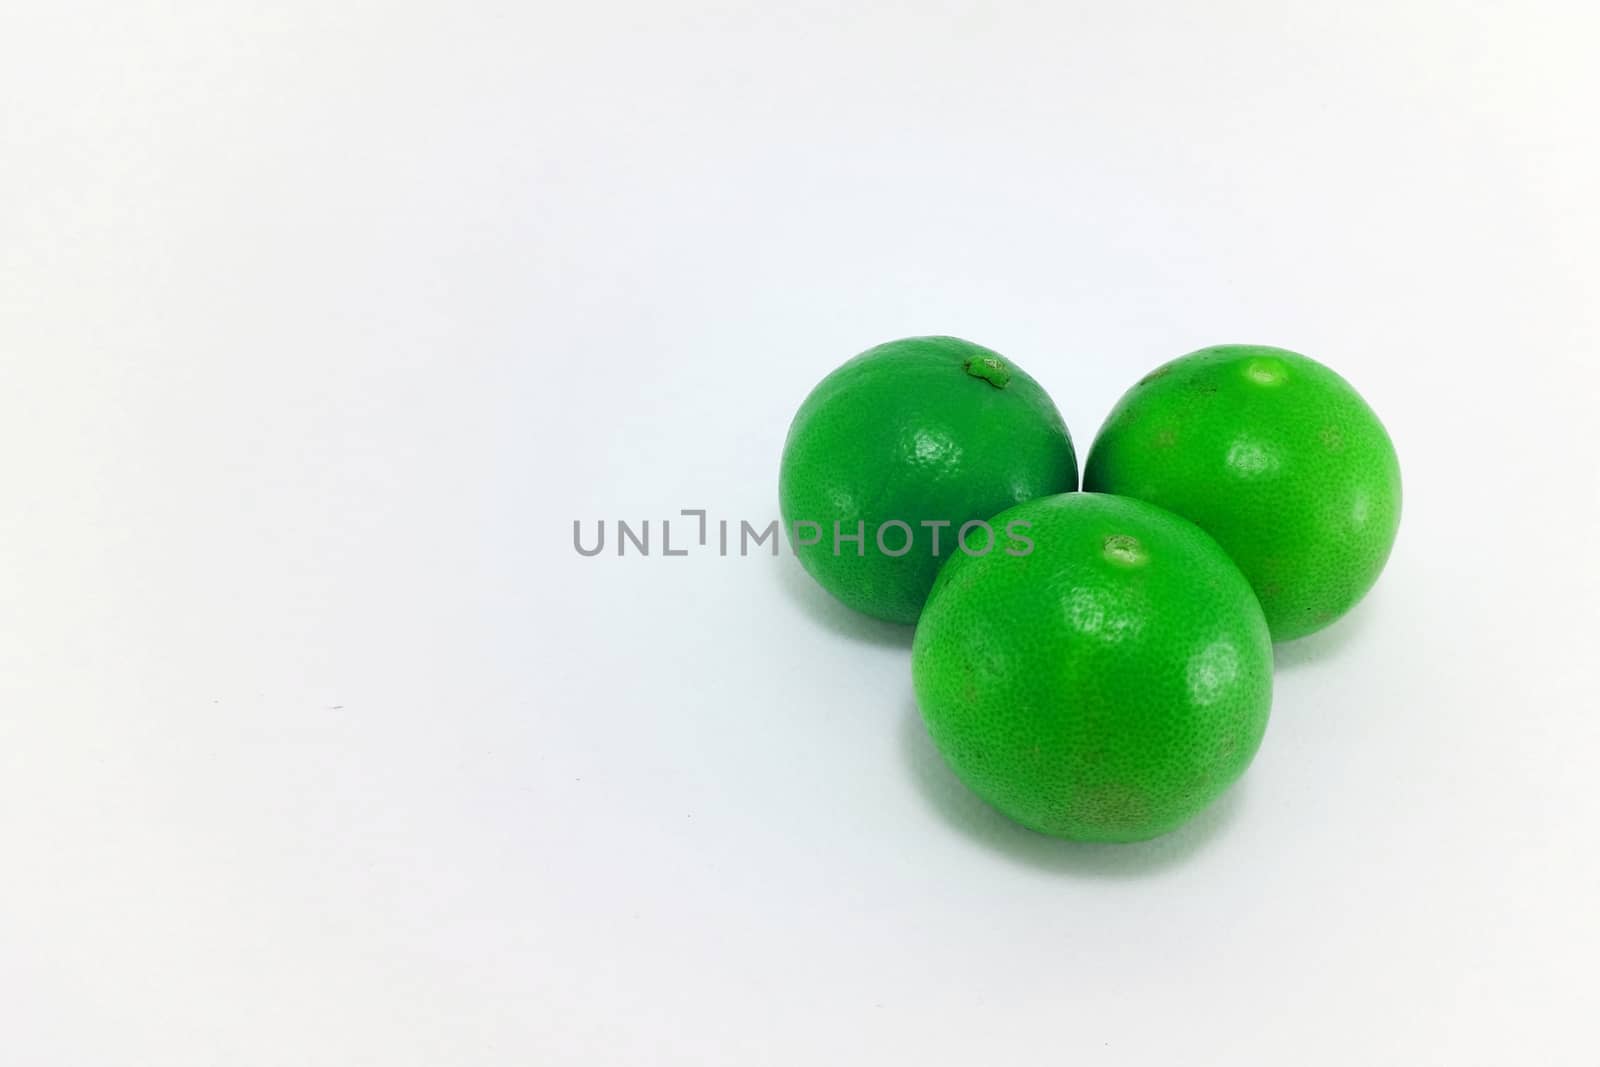 a group of 3 limes on white background







a group of 2 limes on white background